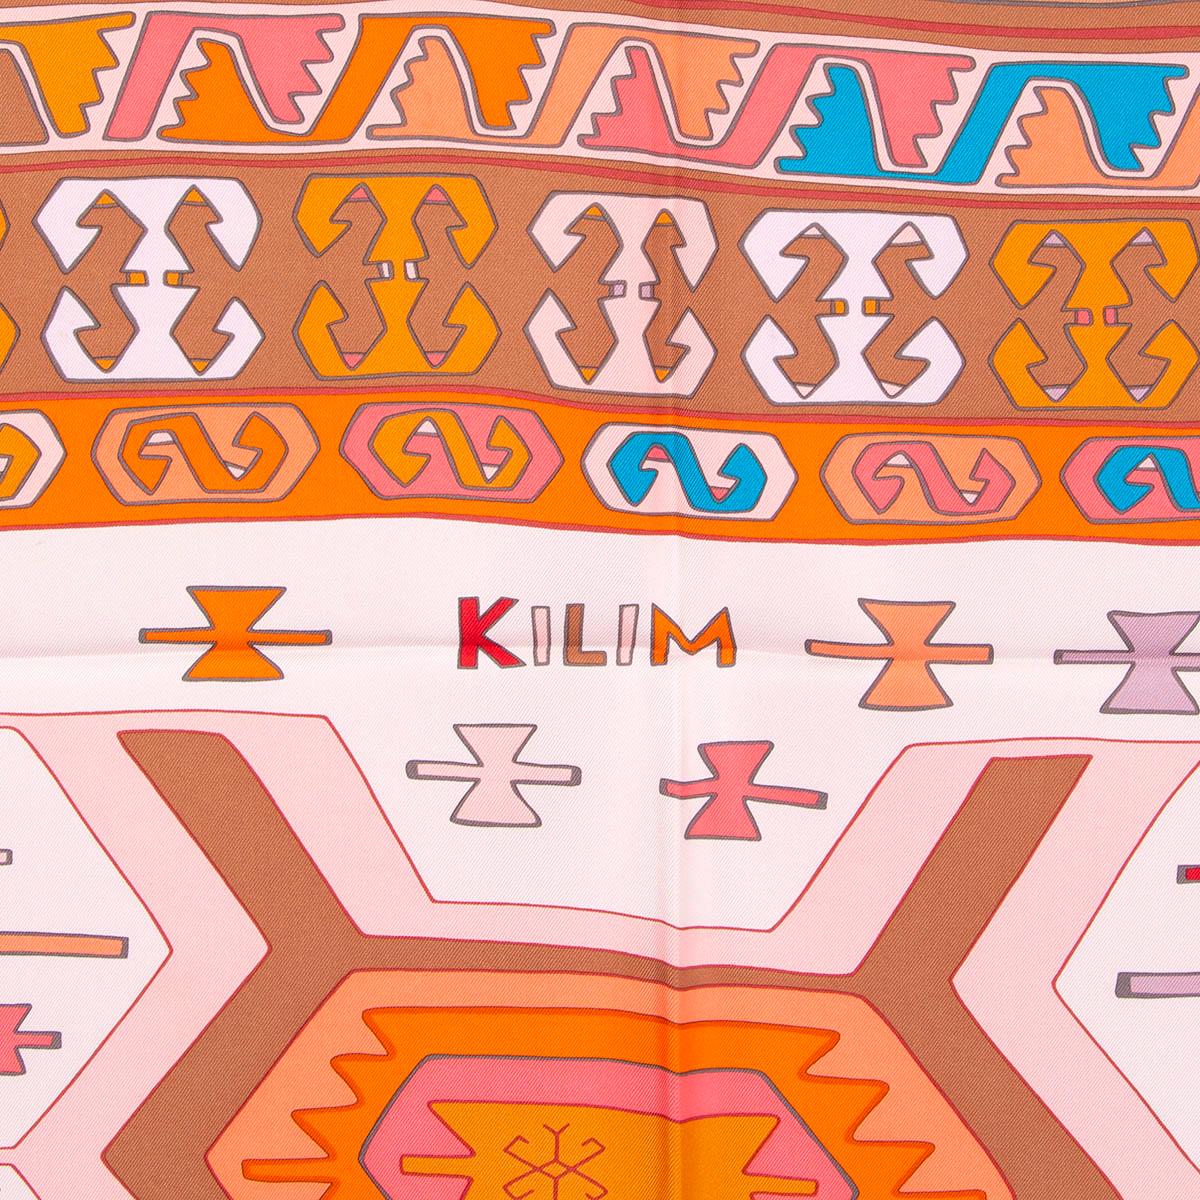 100% authentic Hermes Kilim 90 scarf by Dimitri Rybaltchenko in pale pink silk twill (100%) with tan border and details in red, turquoise, orange and brown. Has been worn and is in excellent condition. 

Measurements
Width	90cm (35.1in)
Height	90cm